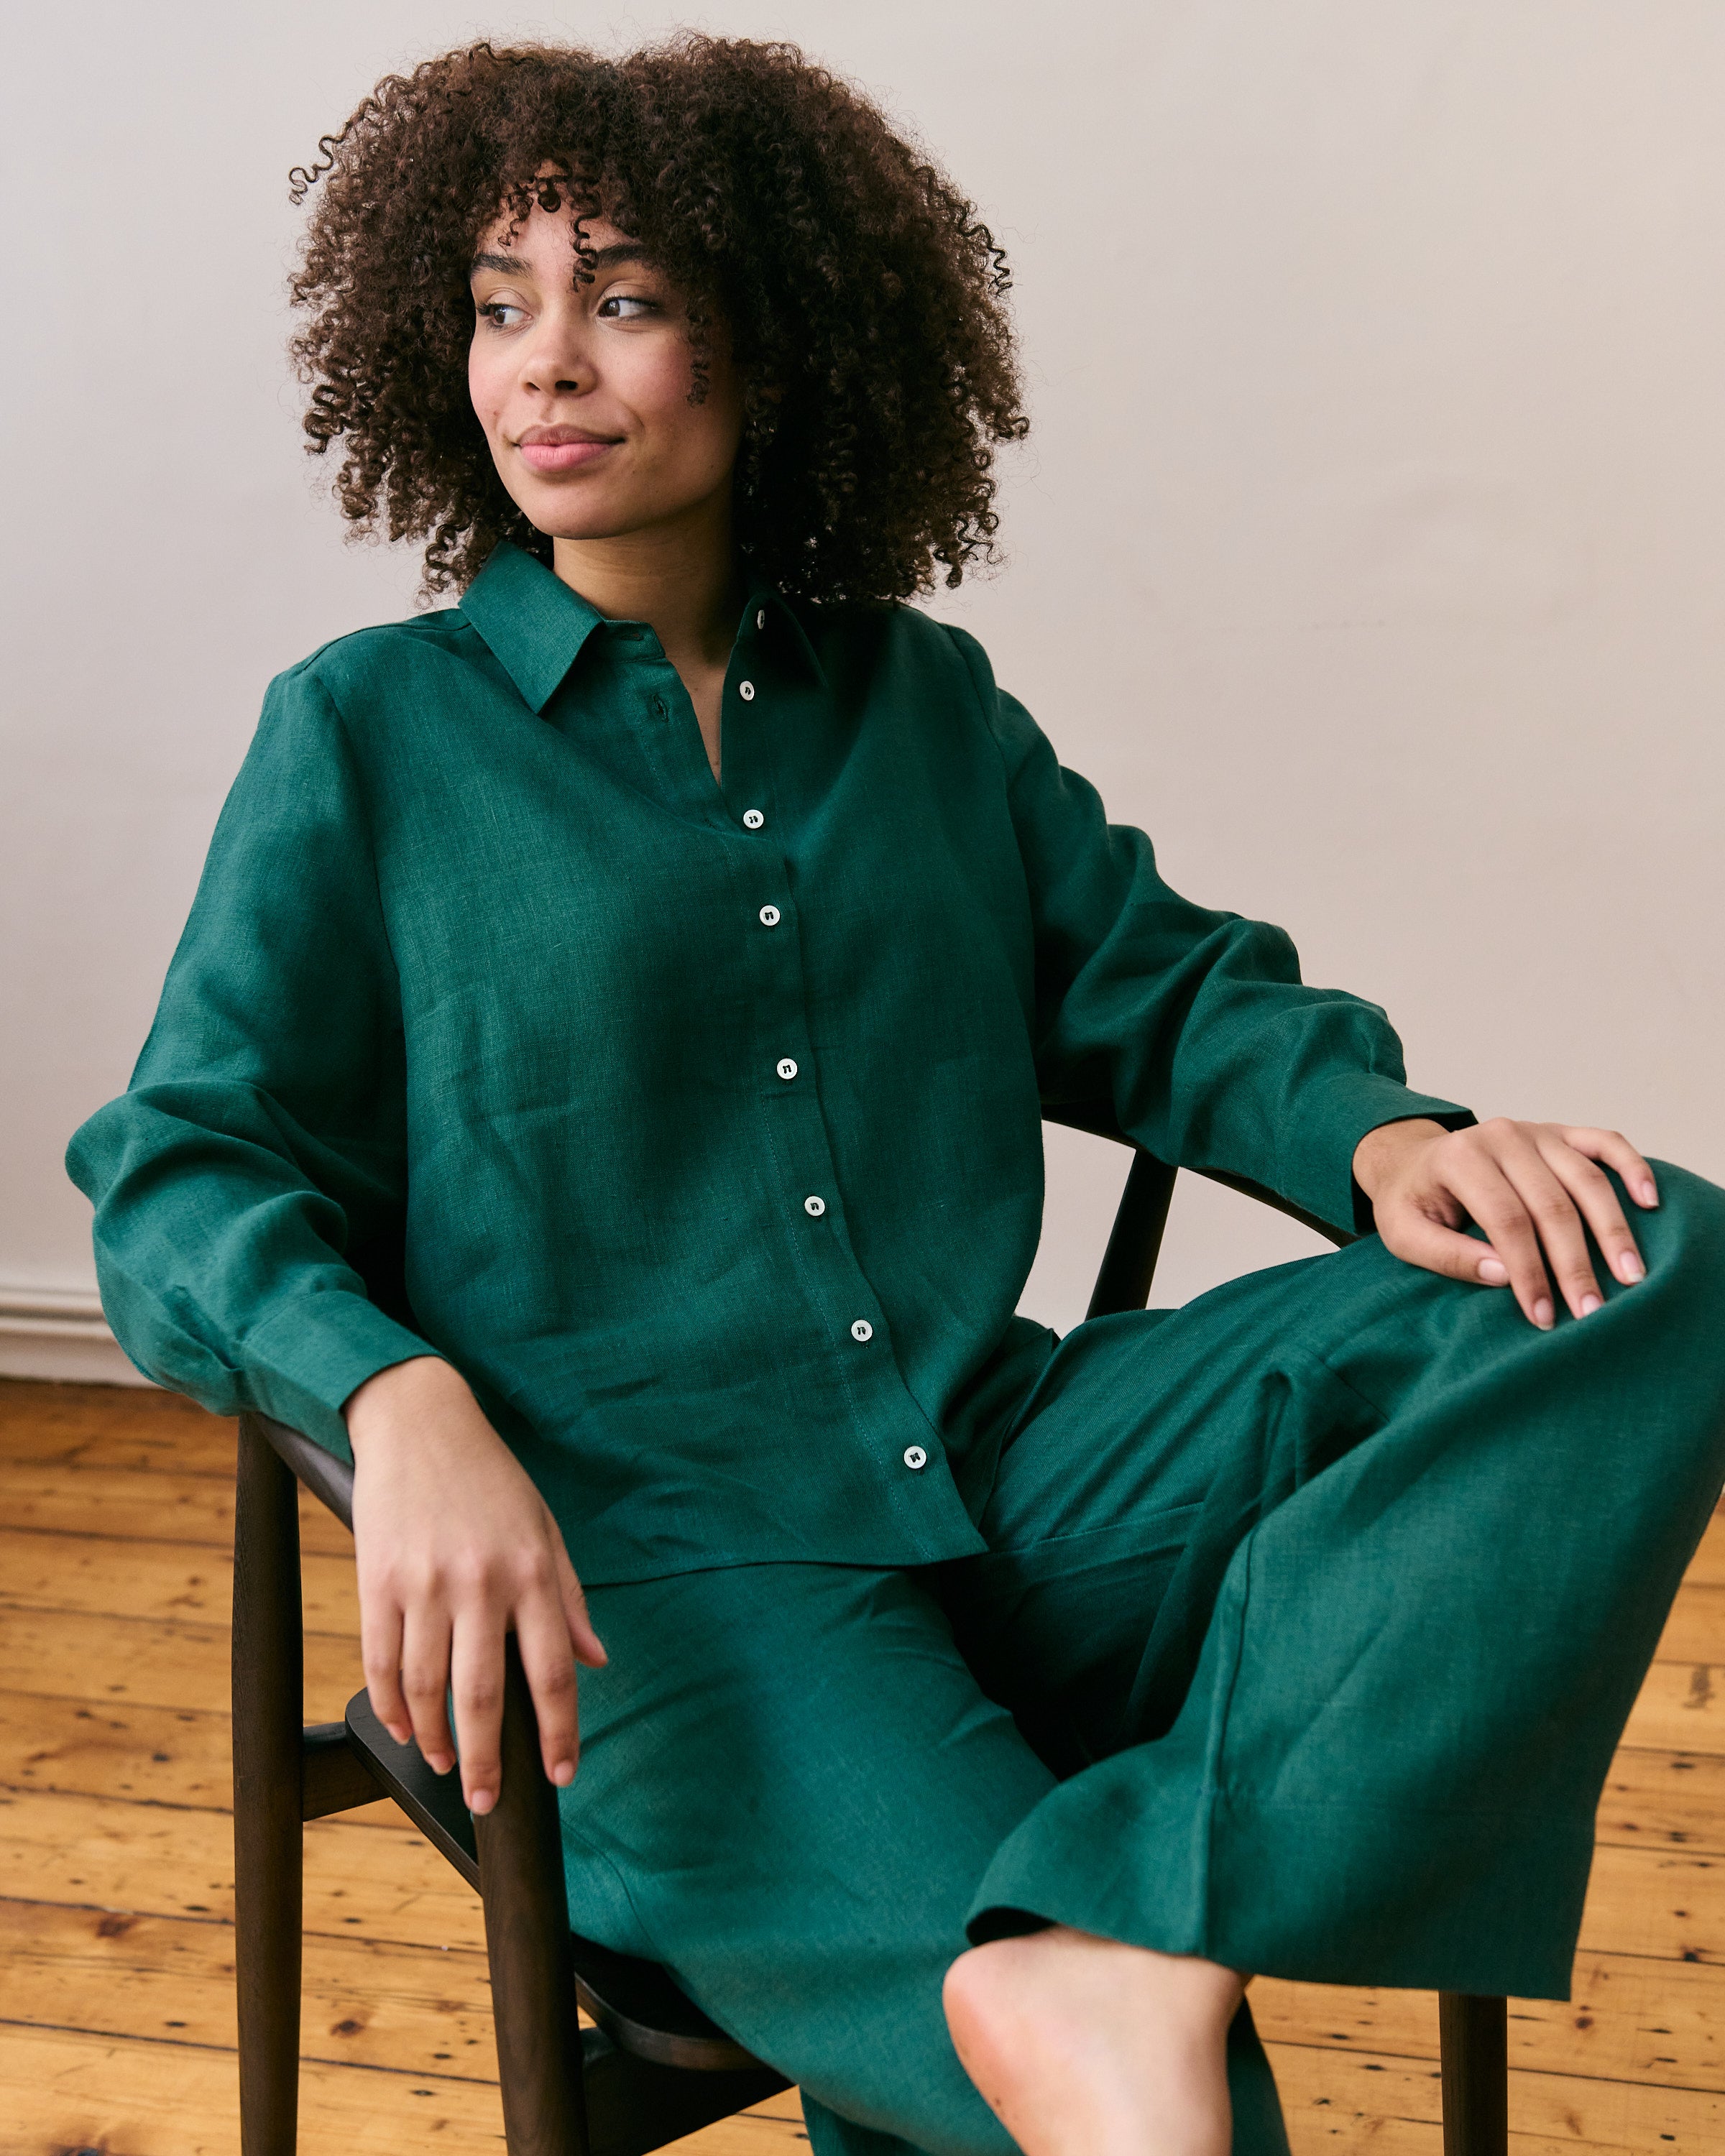 Comfortable green linen trousers and shirt made from 100% Belgian linen.